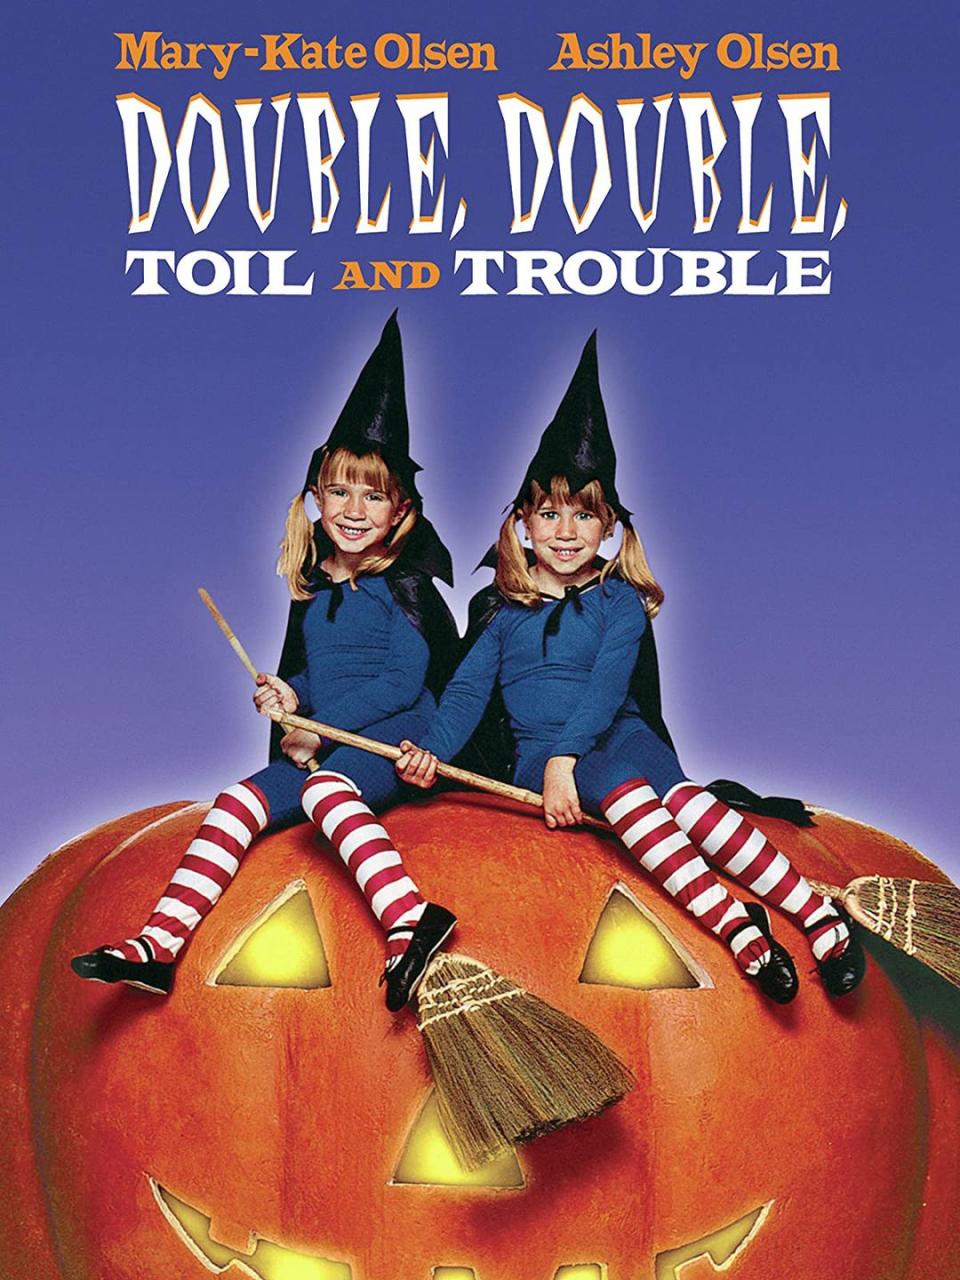 19) Double, Double, Toil and Trouble